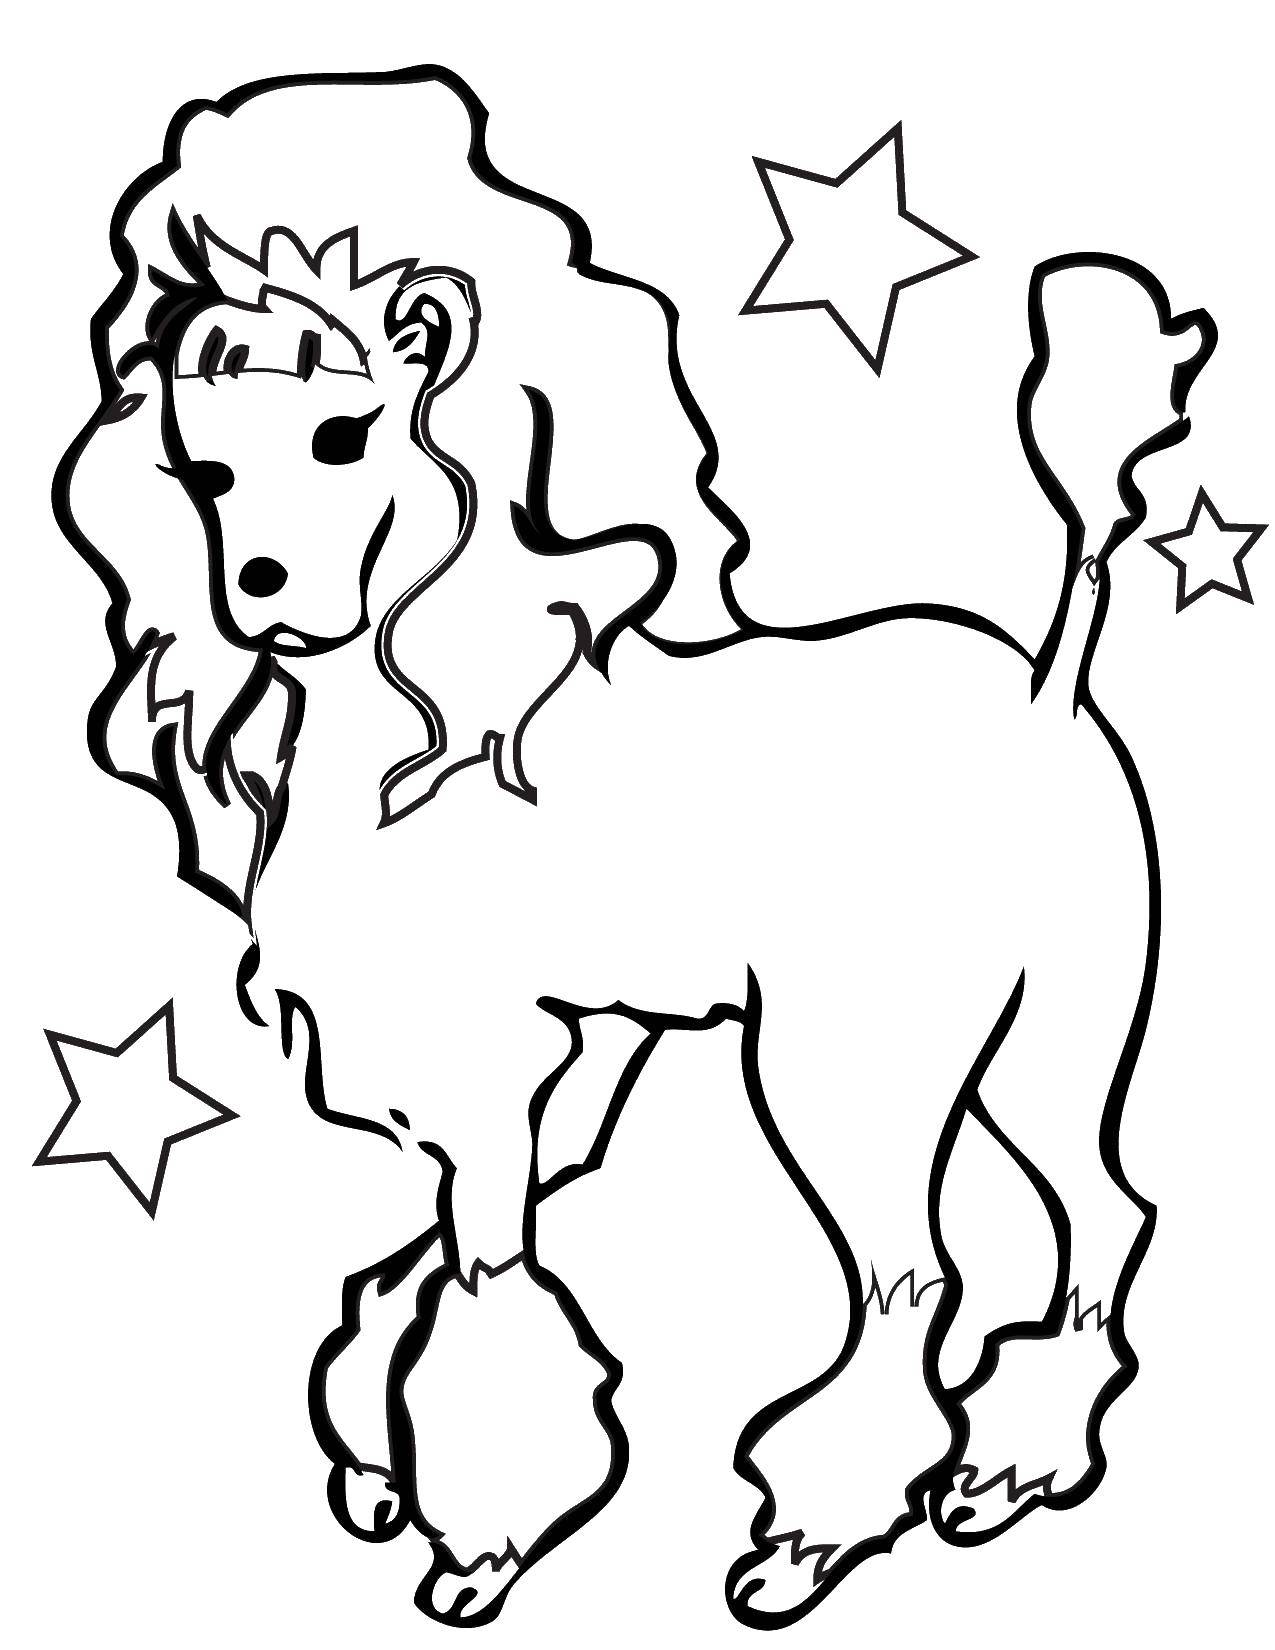 Coloring Star poodle are out. Category Pets allowed. Tags:  Animals, dog.